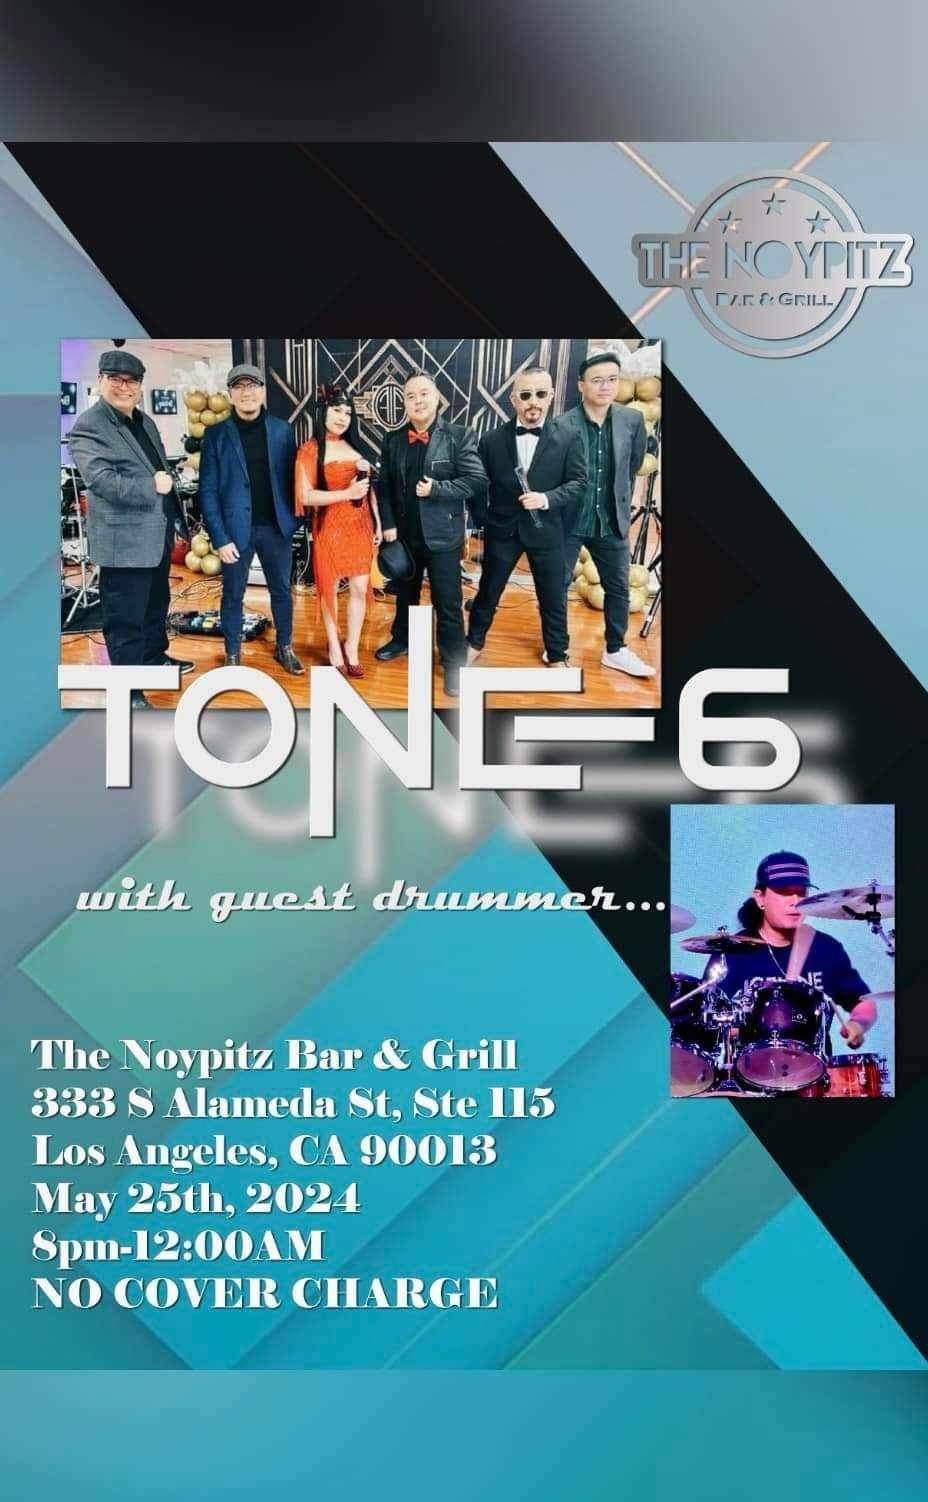 Tone 6 Back in Downtown!